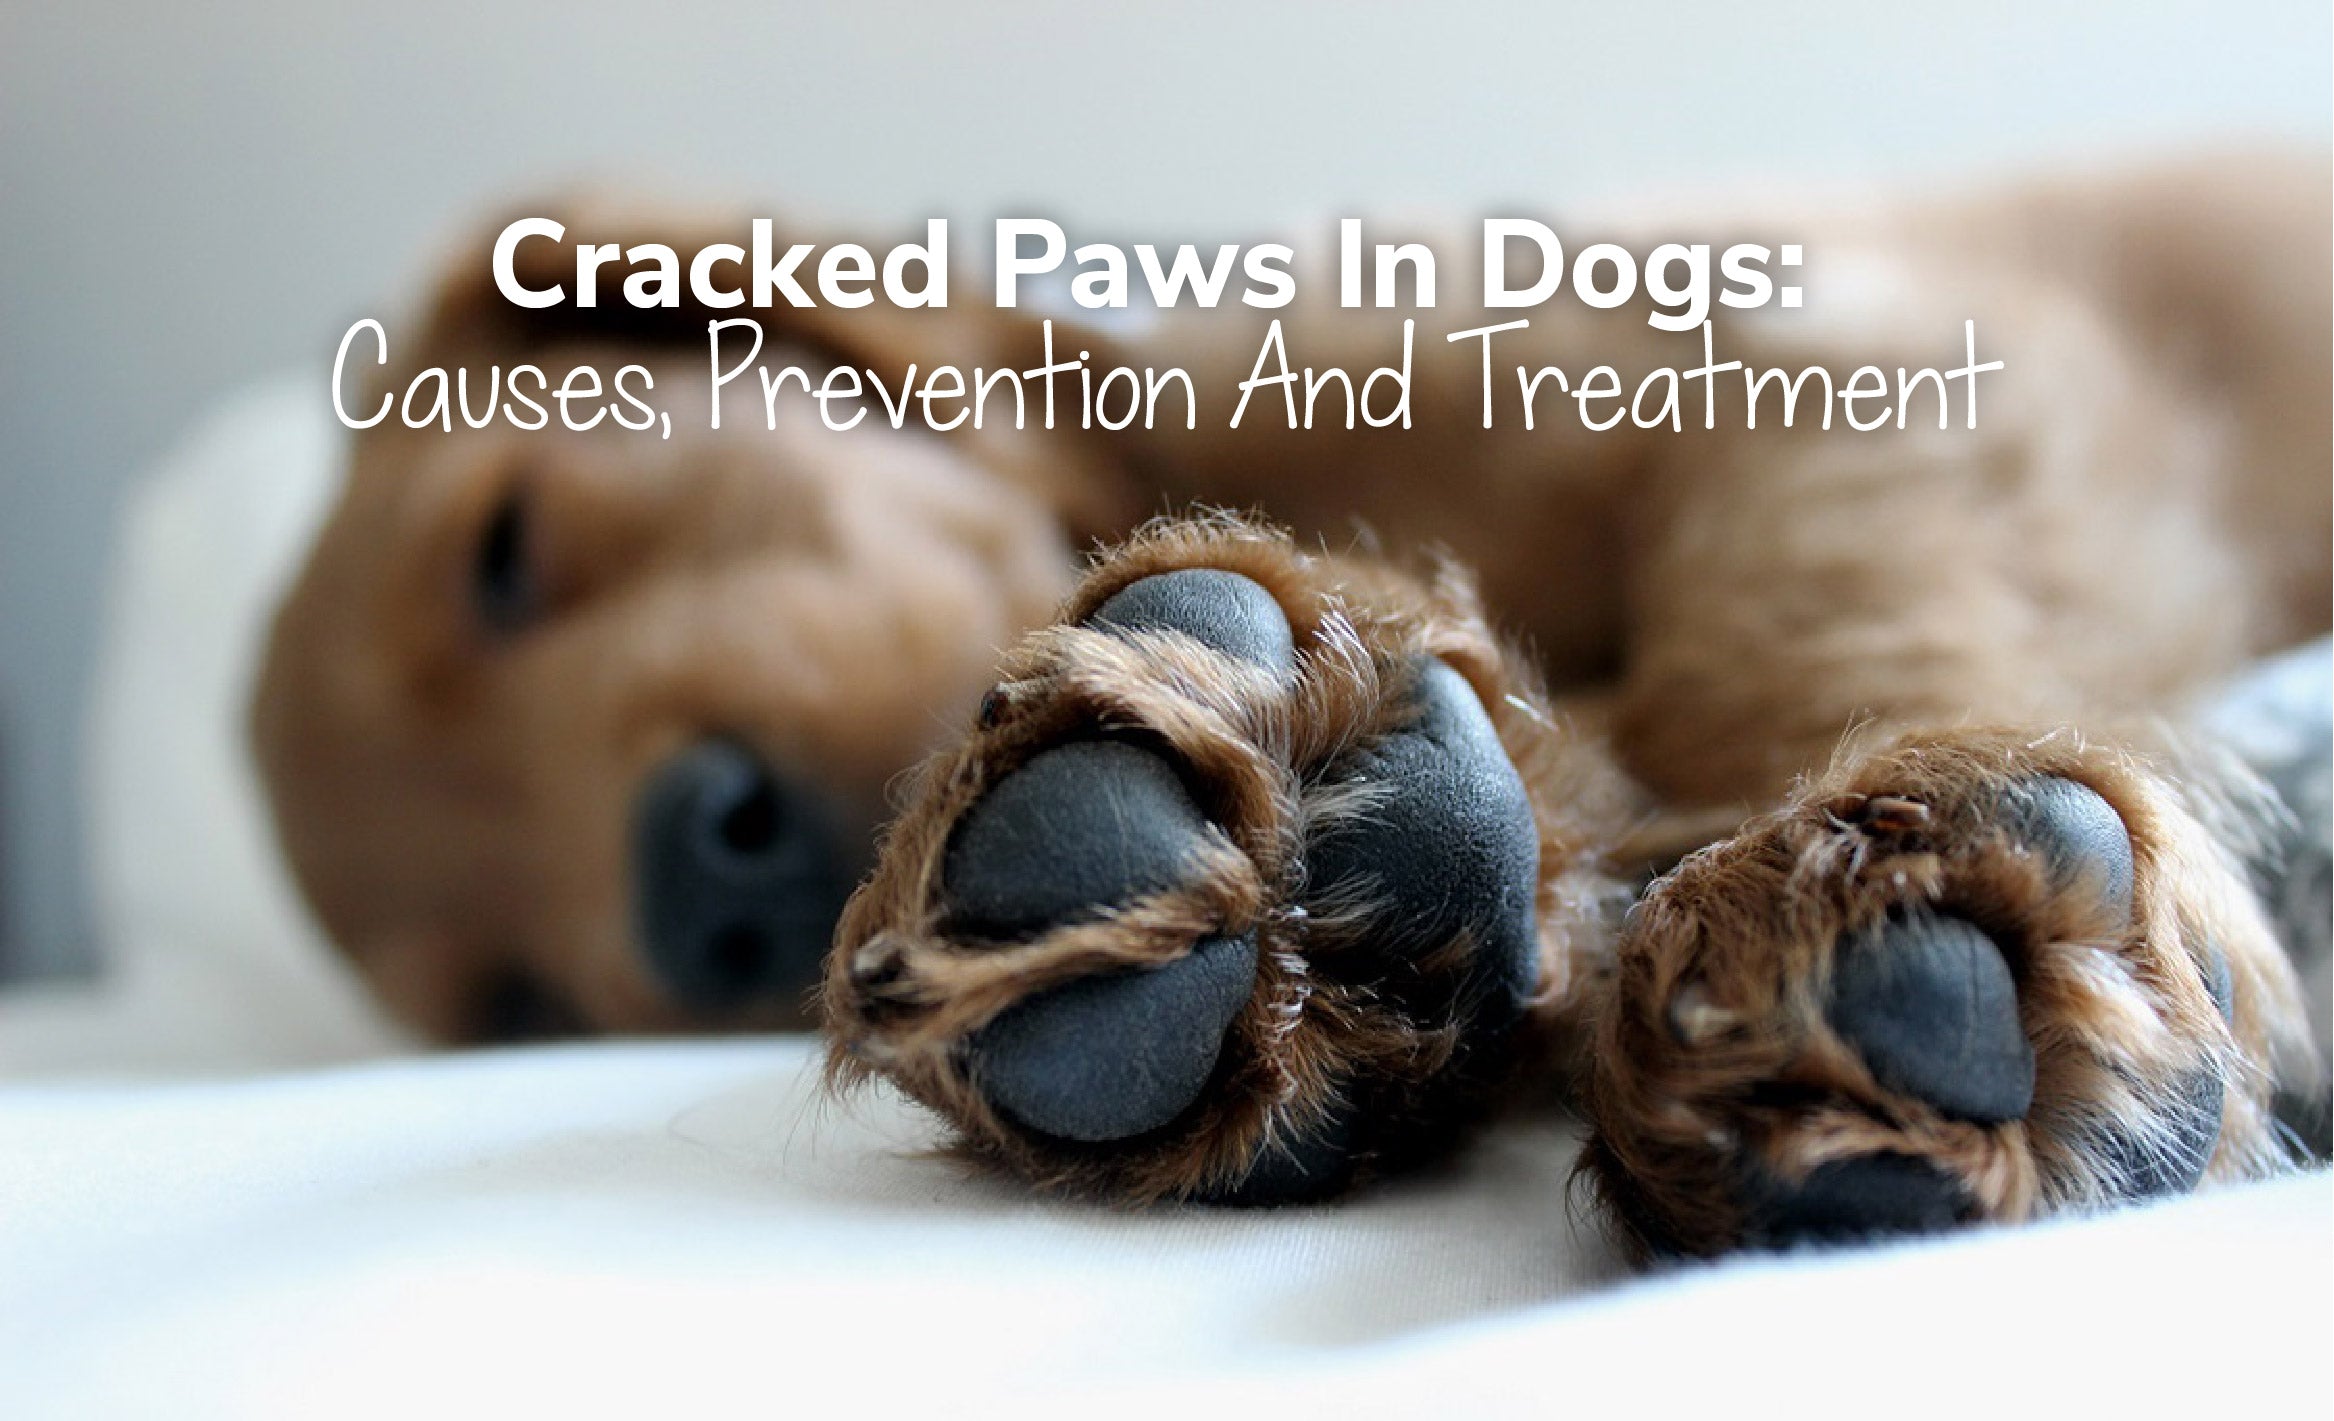 Cracked Paws In Dogs: Causes, Prevention And Treatment